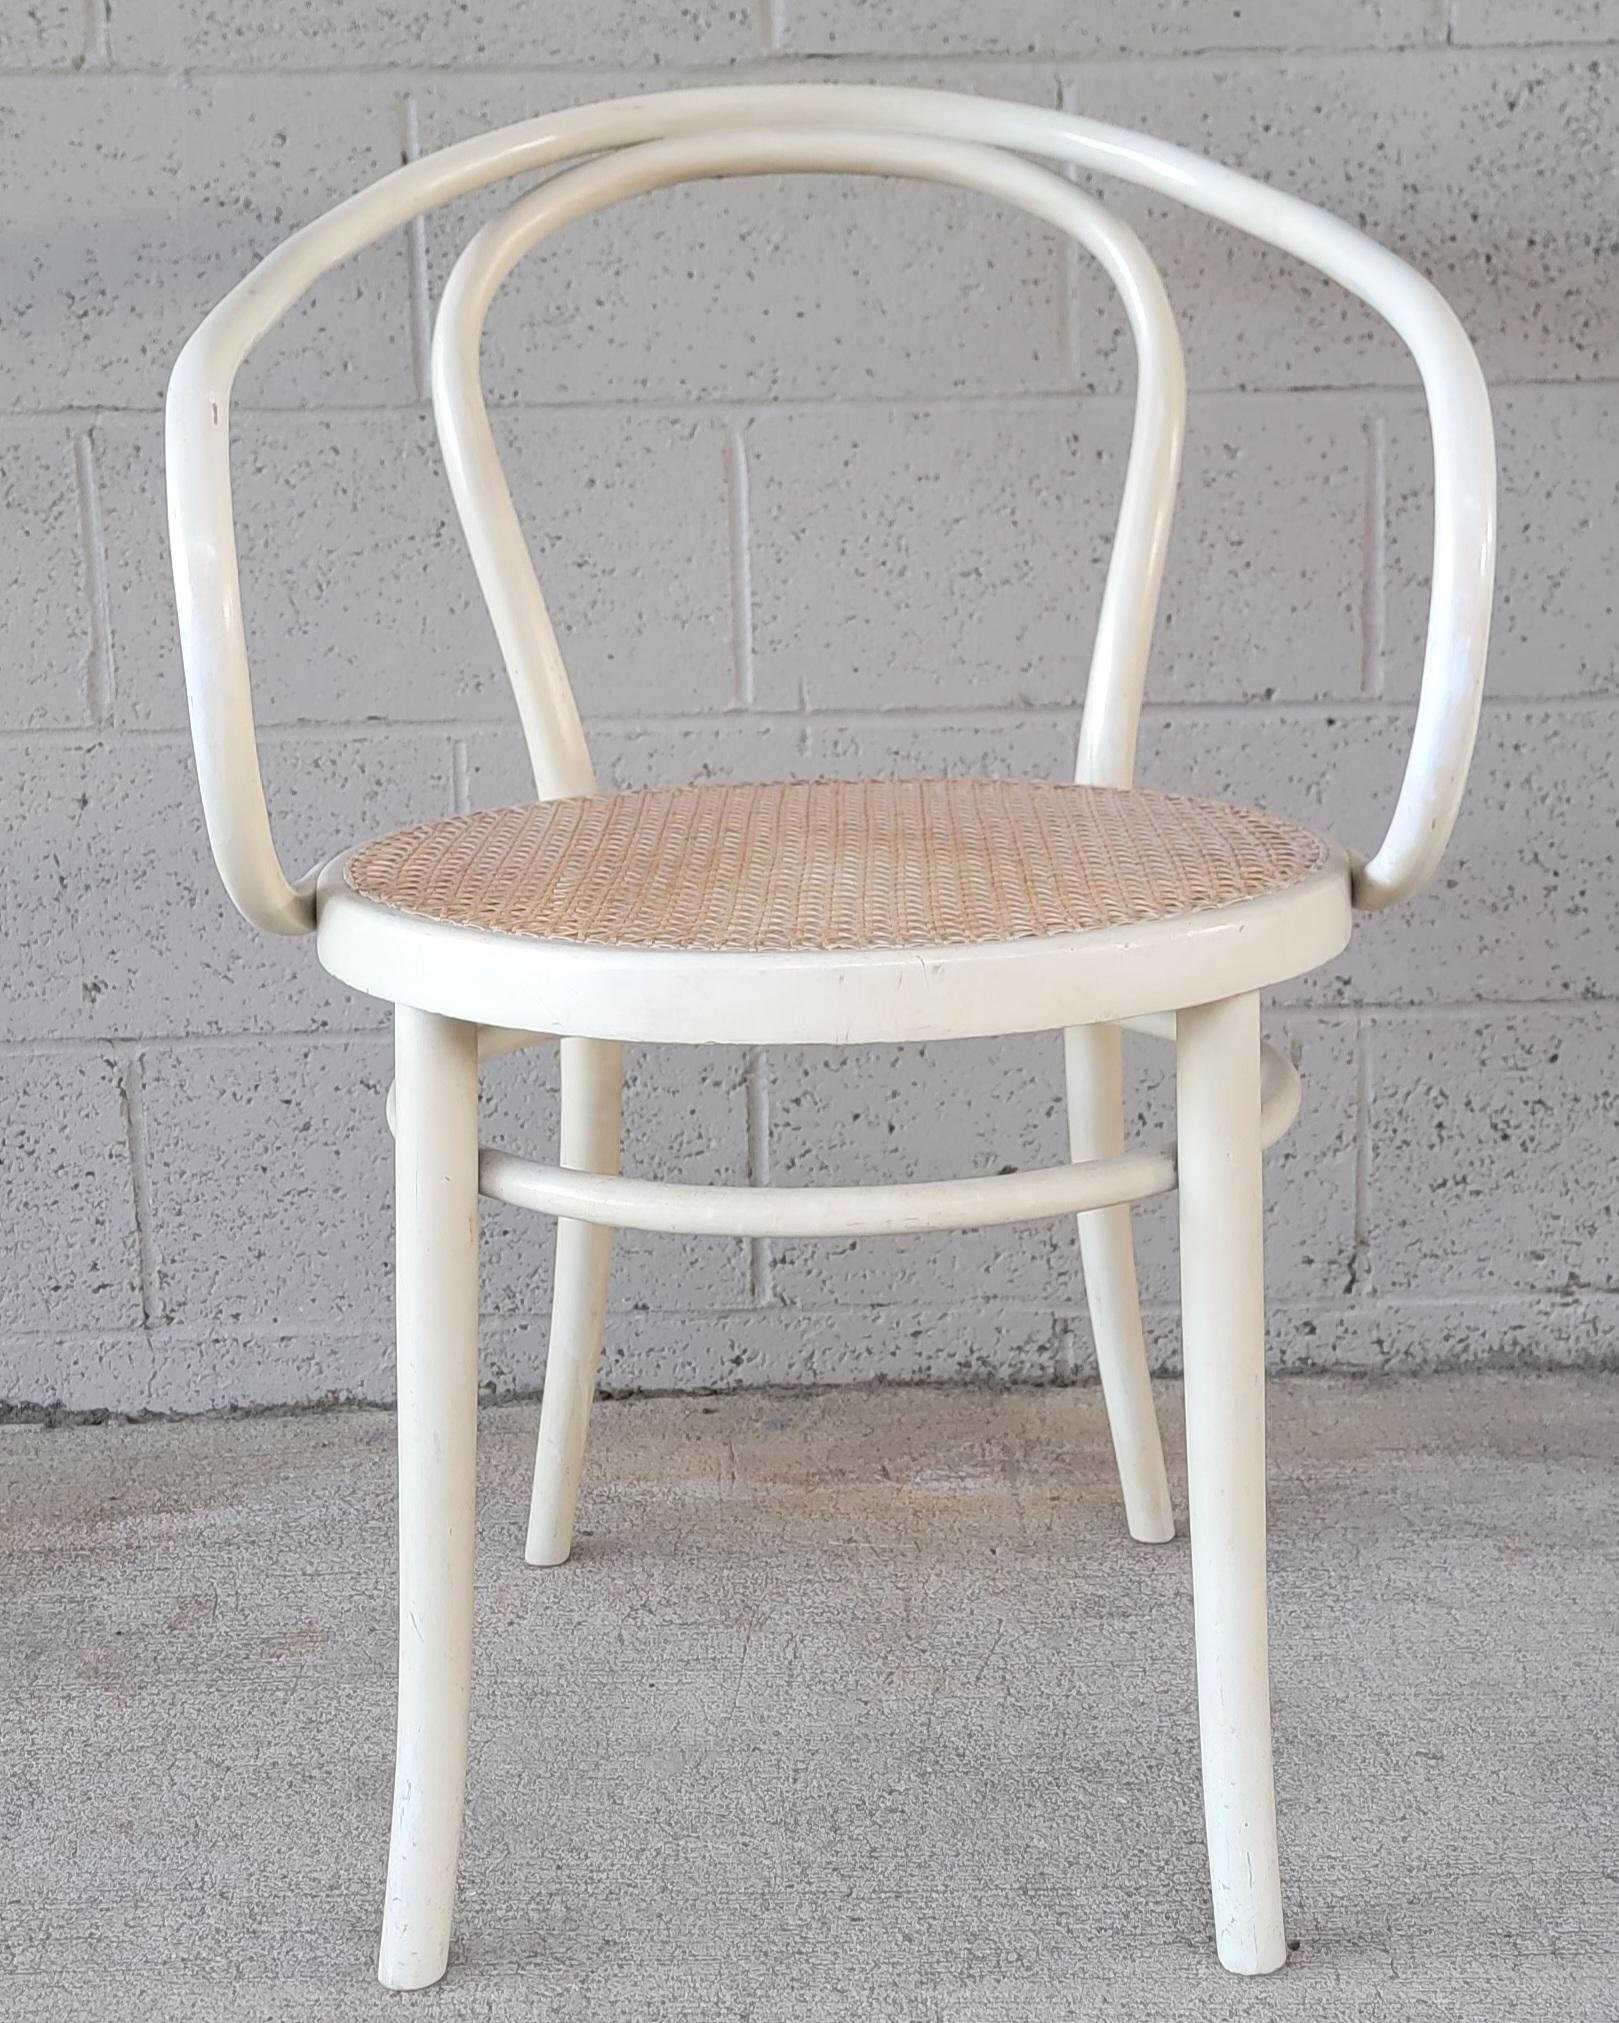  Thonet Bentwood Armchair Attrbuted to Wiener Stuhl In Good Condition For Sale In Fulton, CA